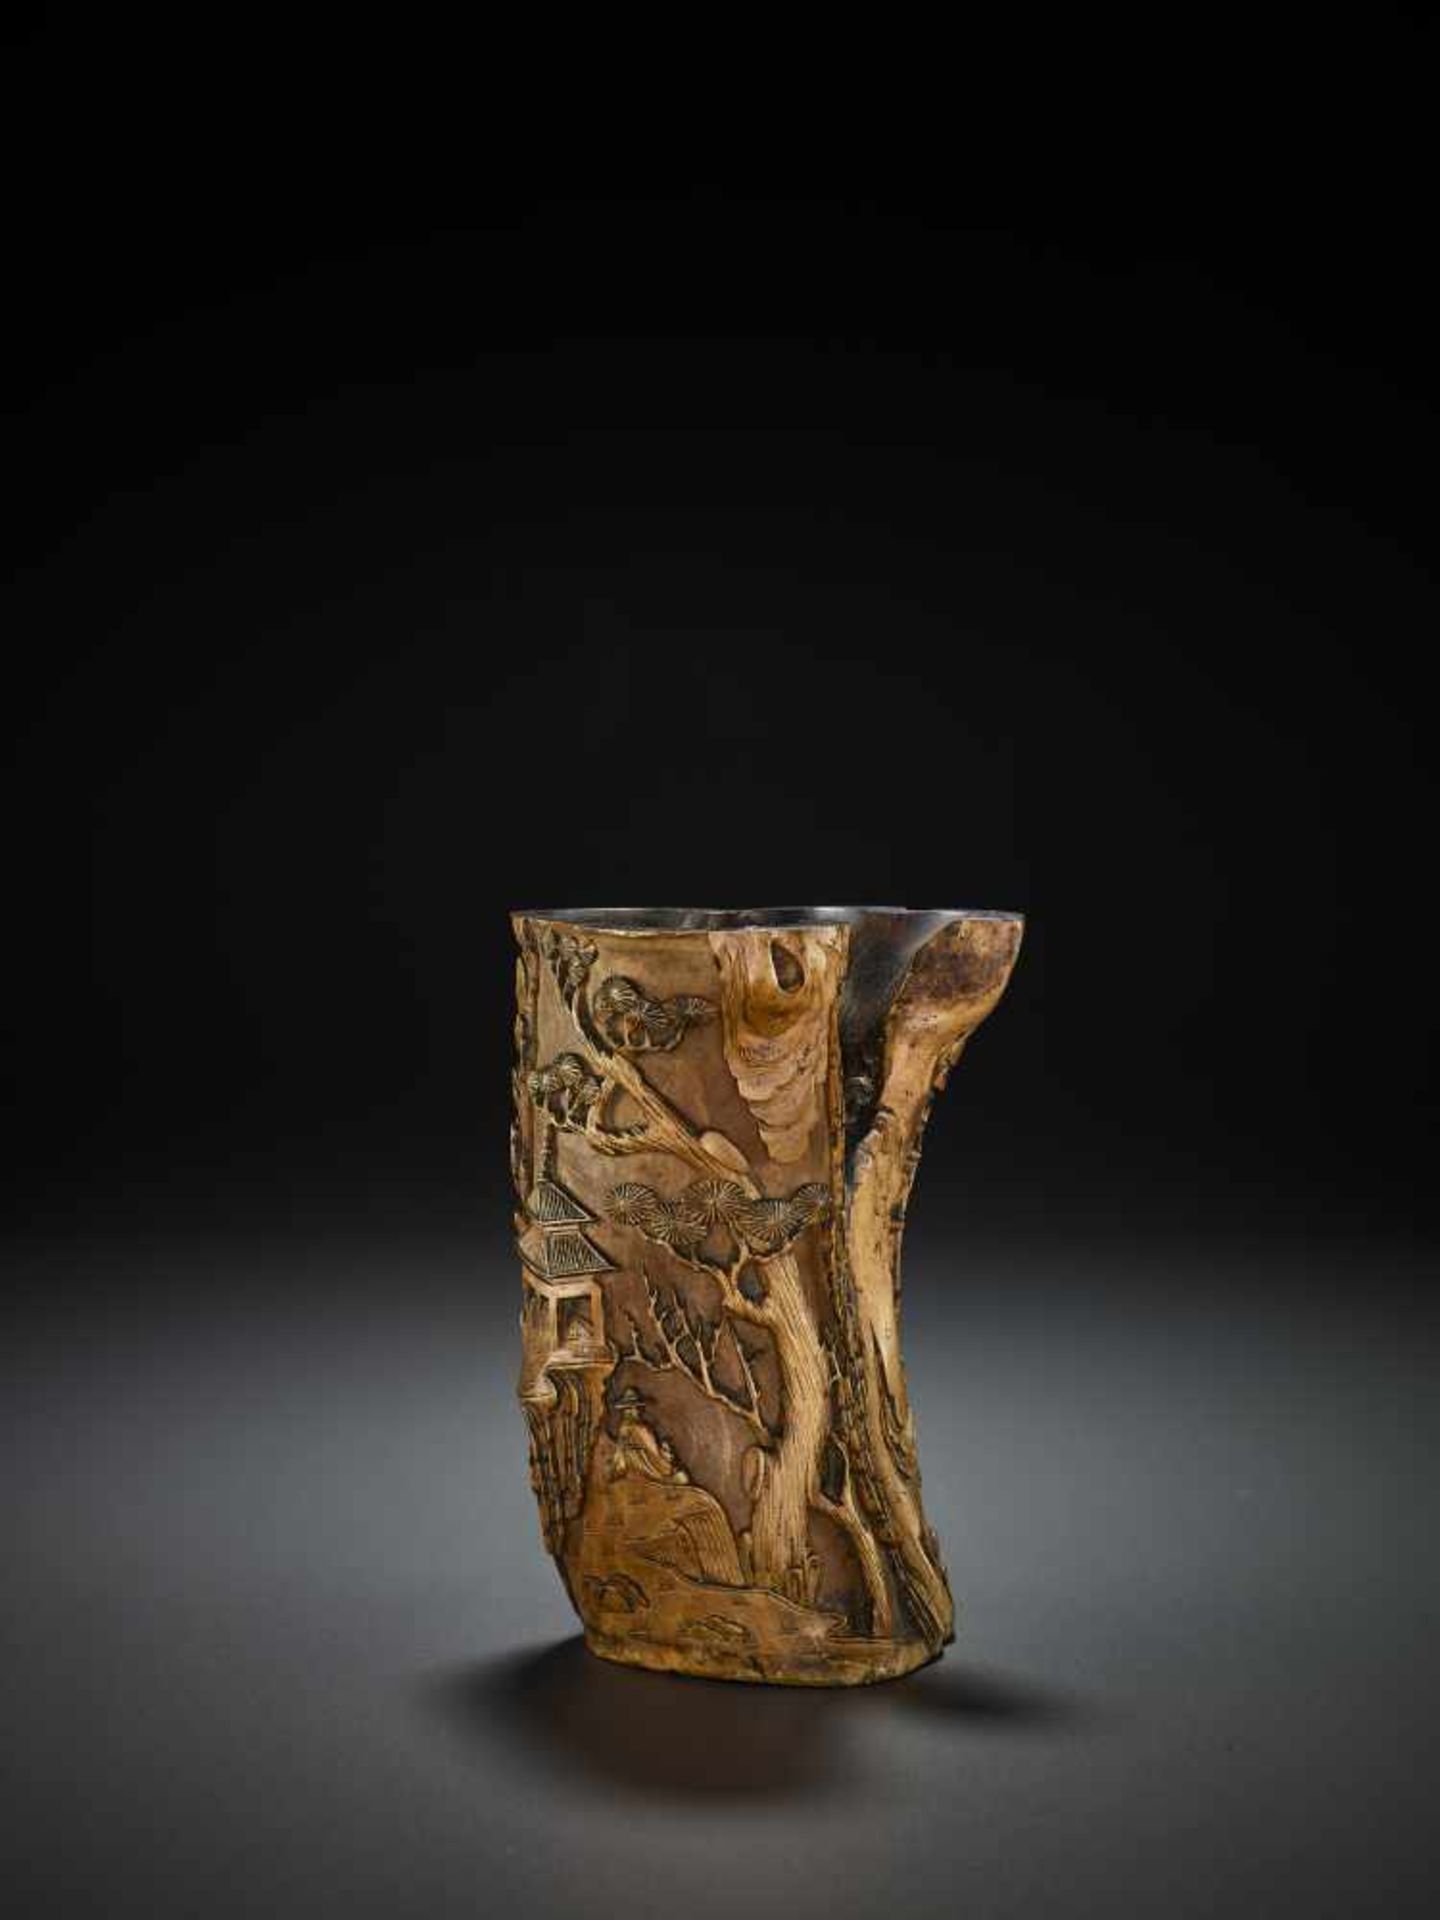 A CARVED WOOD BITONG, QING China, 18th – earlier 19th century. Several natural crevices are cleverly